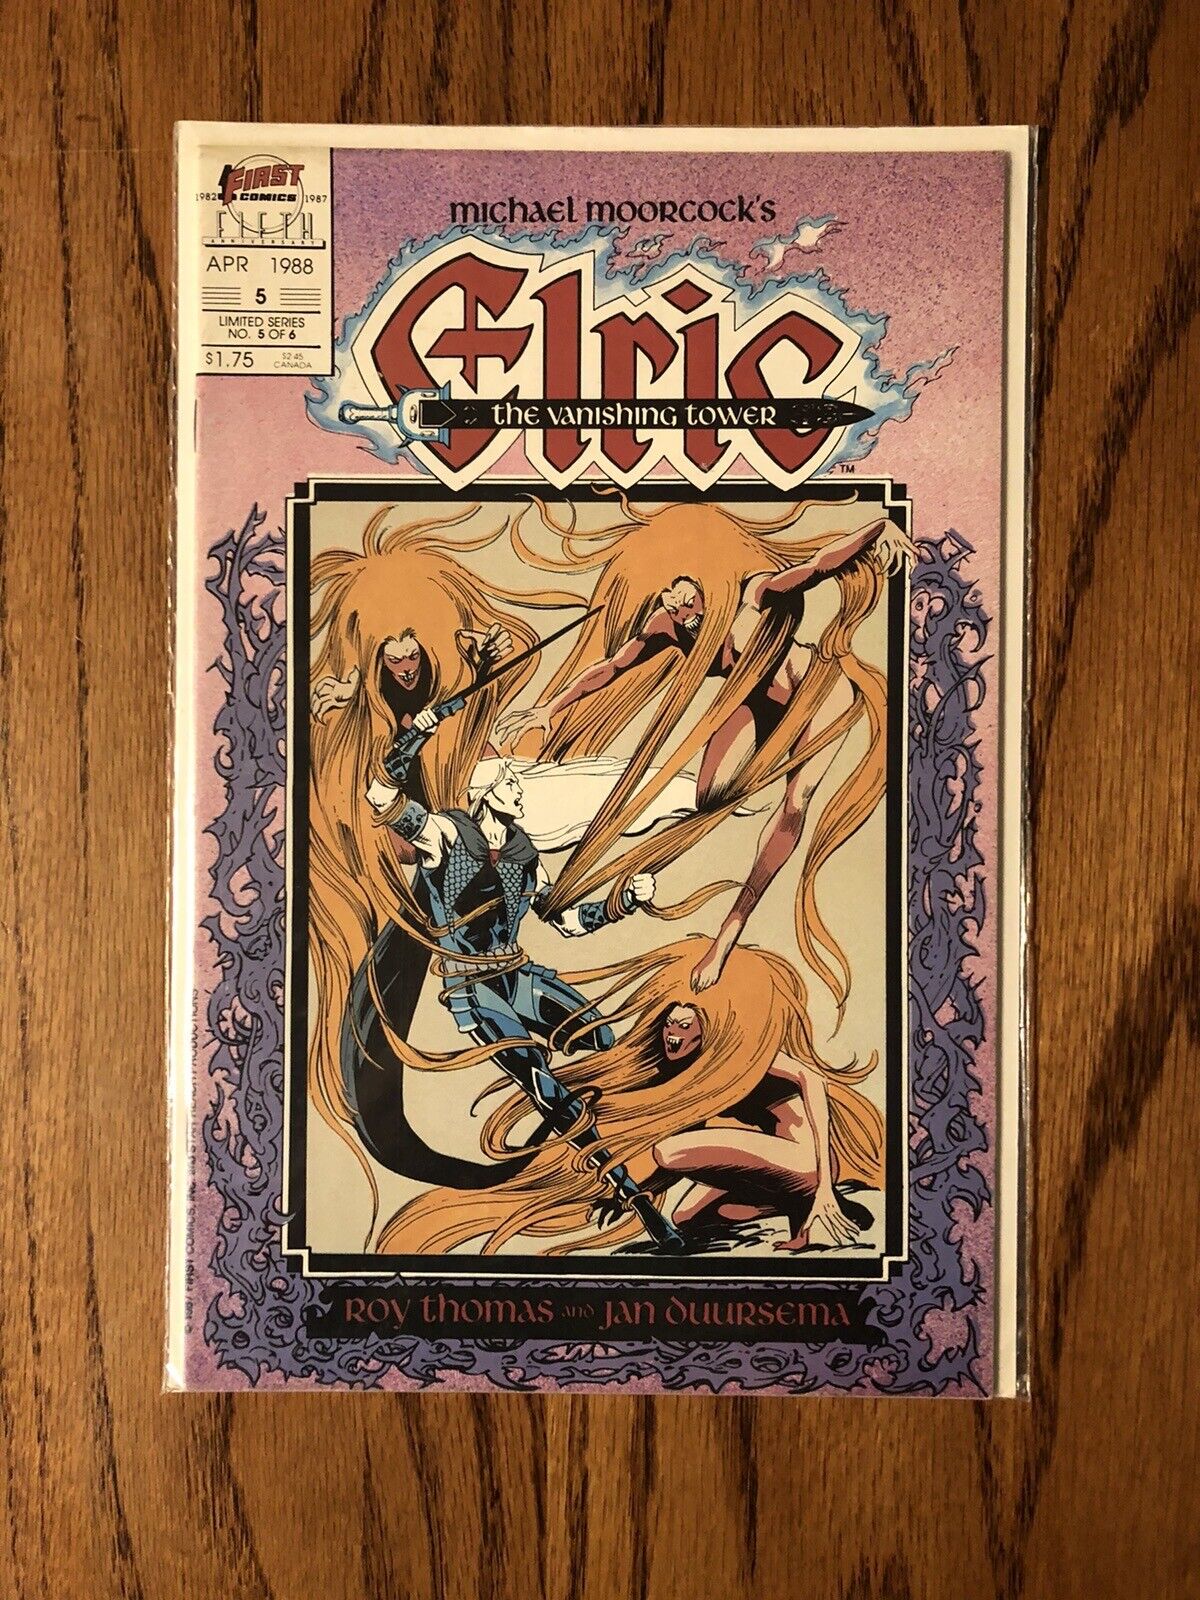 Elric The Vanishing Tower (1986) #5 - Michael Moorcock - VG Condition